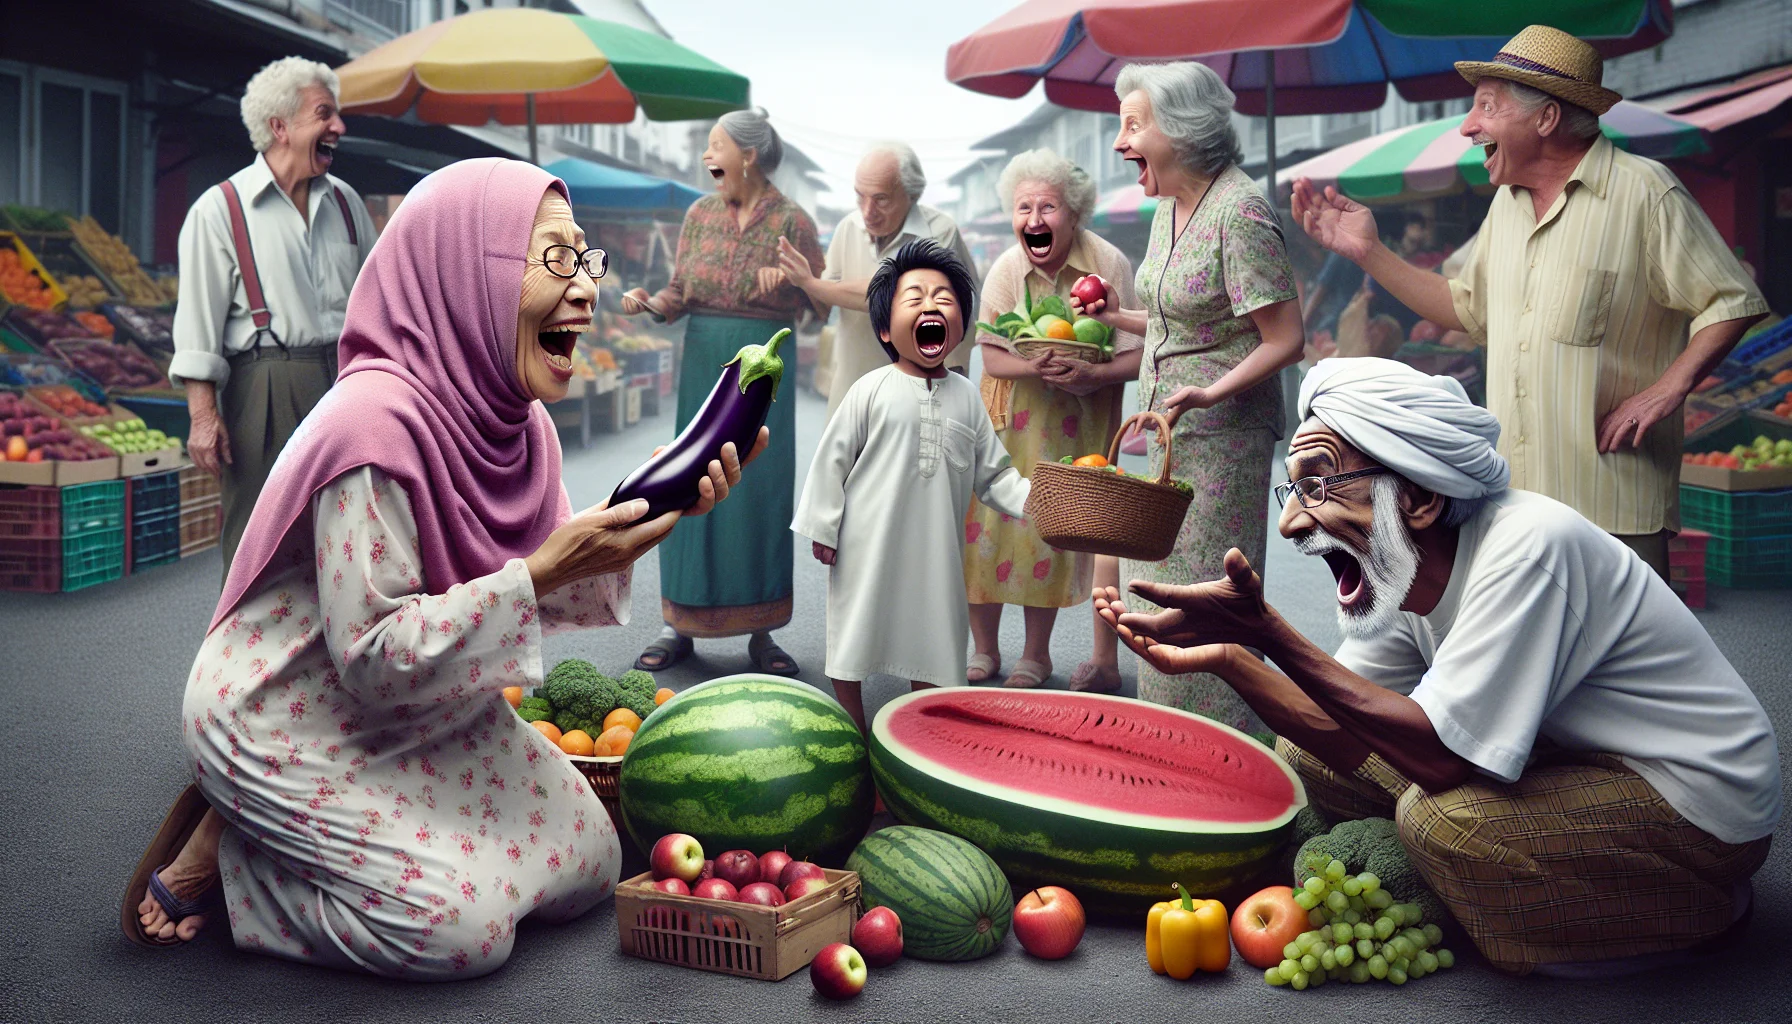 A humorous, realistic image unfolds before us. A lively scene at a bustling farmers' market. Elder people of a range of descents, from Middle-Eastern to Hispanic to Caucasian, are animatedly haggling over fresh fruits and vegetables. A South Asian woman in her golden years is meticulously examining an eggplant, a satisfied grin on her face. A Black elderly man is playfully arguing with a seller over the ripeness of a huge watermelon, attracting chuckles from all around. A fit, Caucasian grandma is about to bite into a shiny, red apple with an exaggerated wide-open mouth, clearly overexcited about her healthy choice.